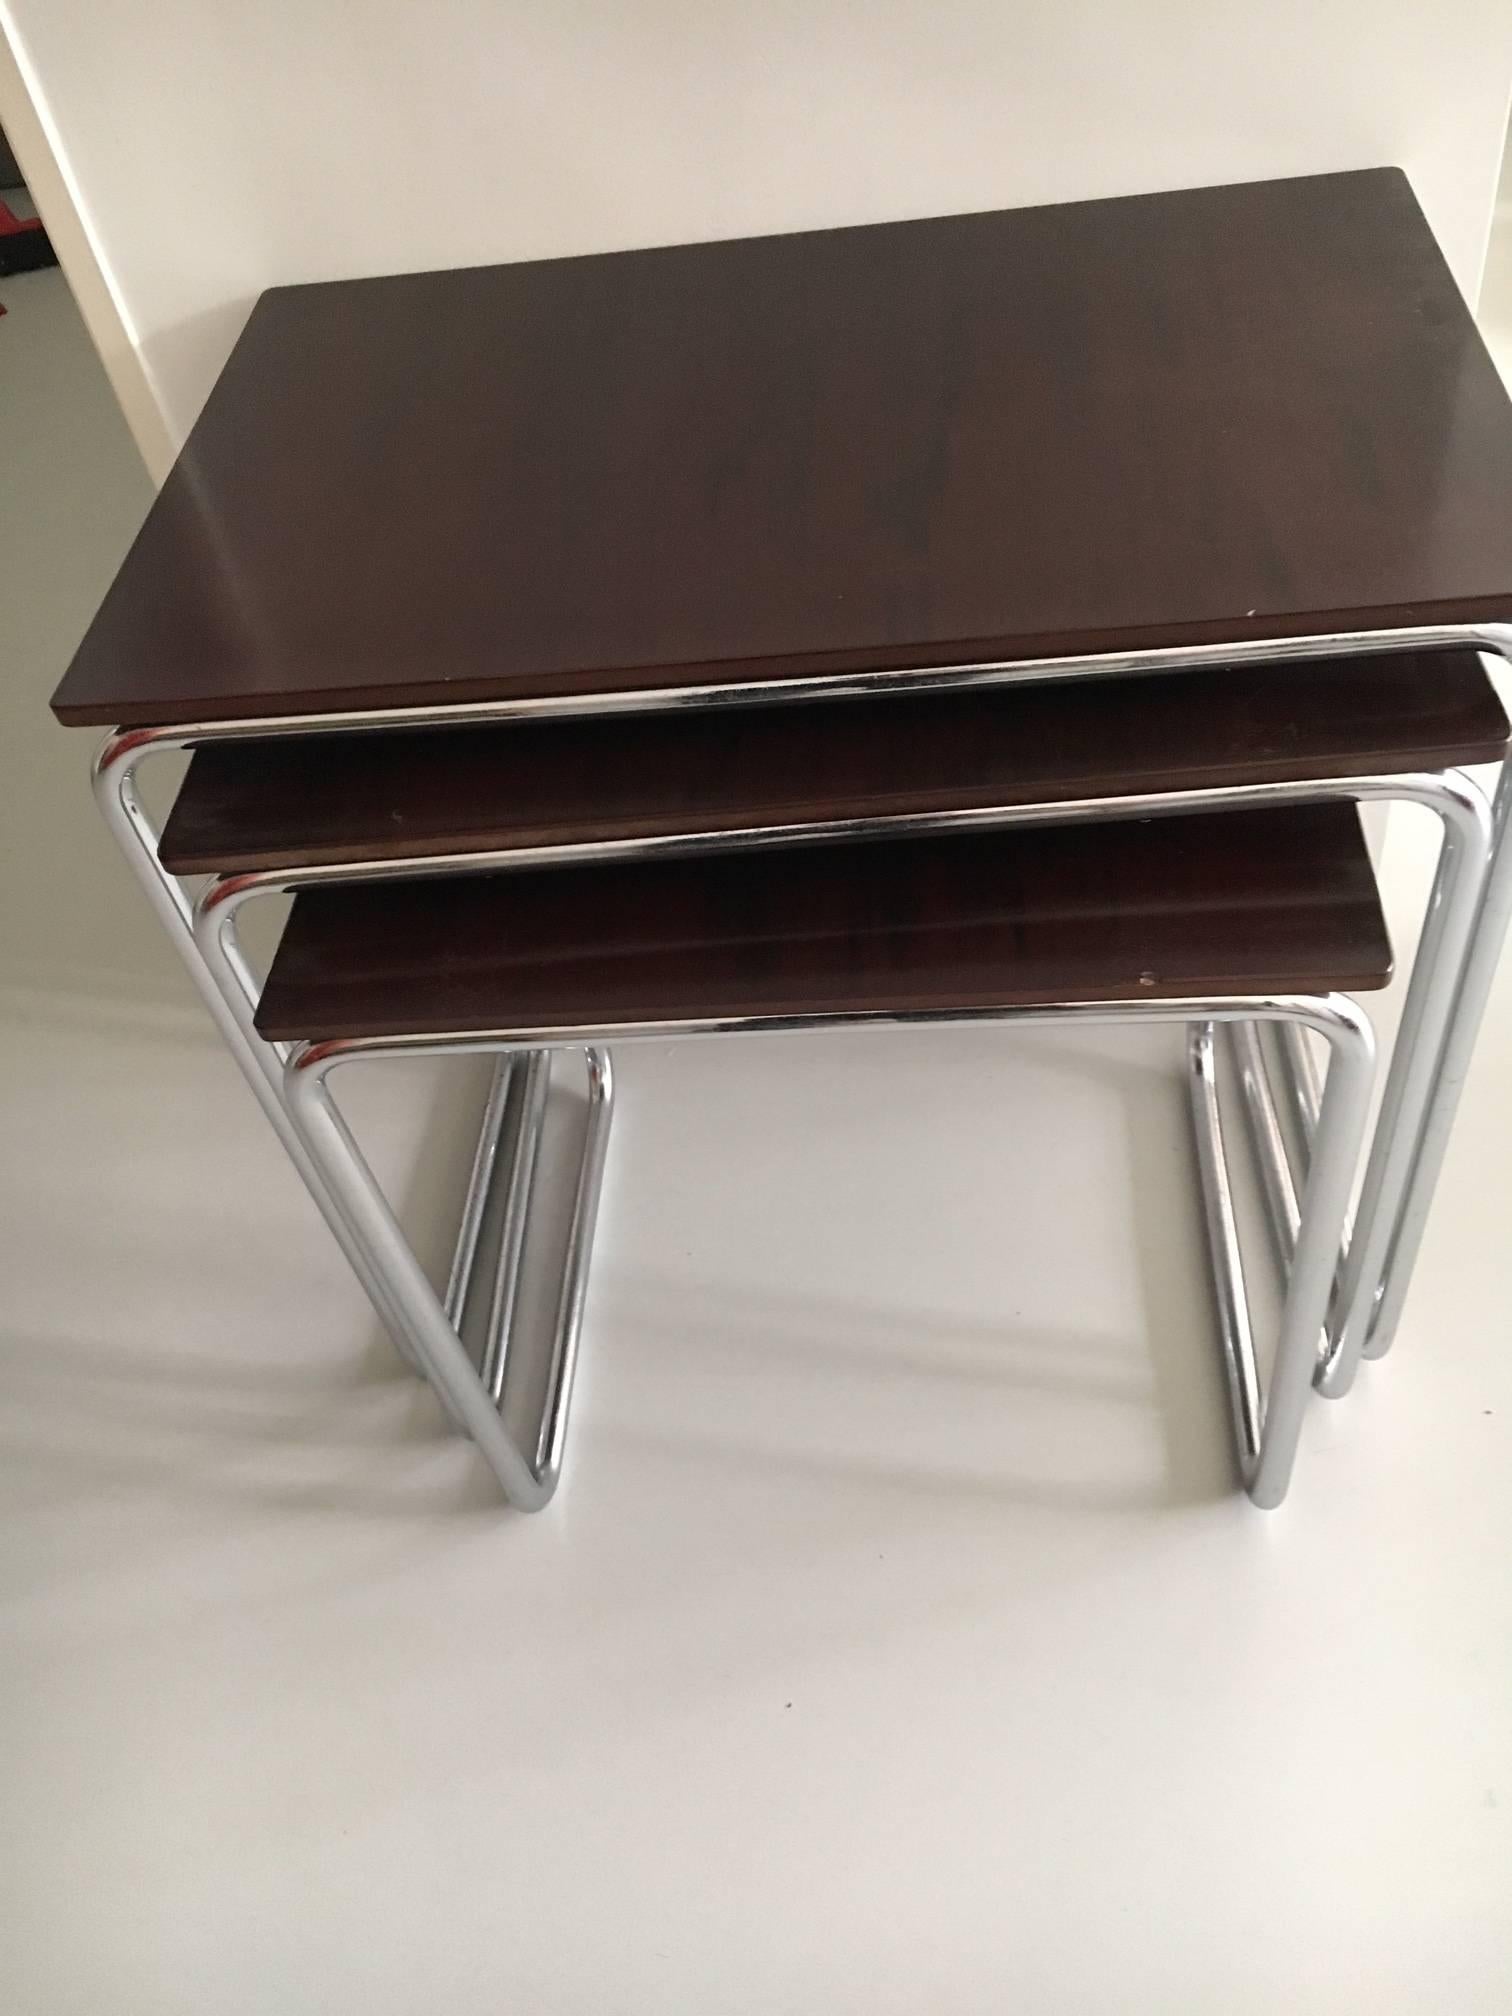 Nest of three side tables of tubular steel with authentic bakelite tops. Produced by Veha, former J.B. van Heyst & Sons in the Hague. The firm was known for the production of their steel windows and doors for functionalist architecture of the 1930s.